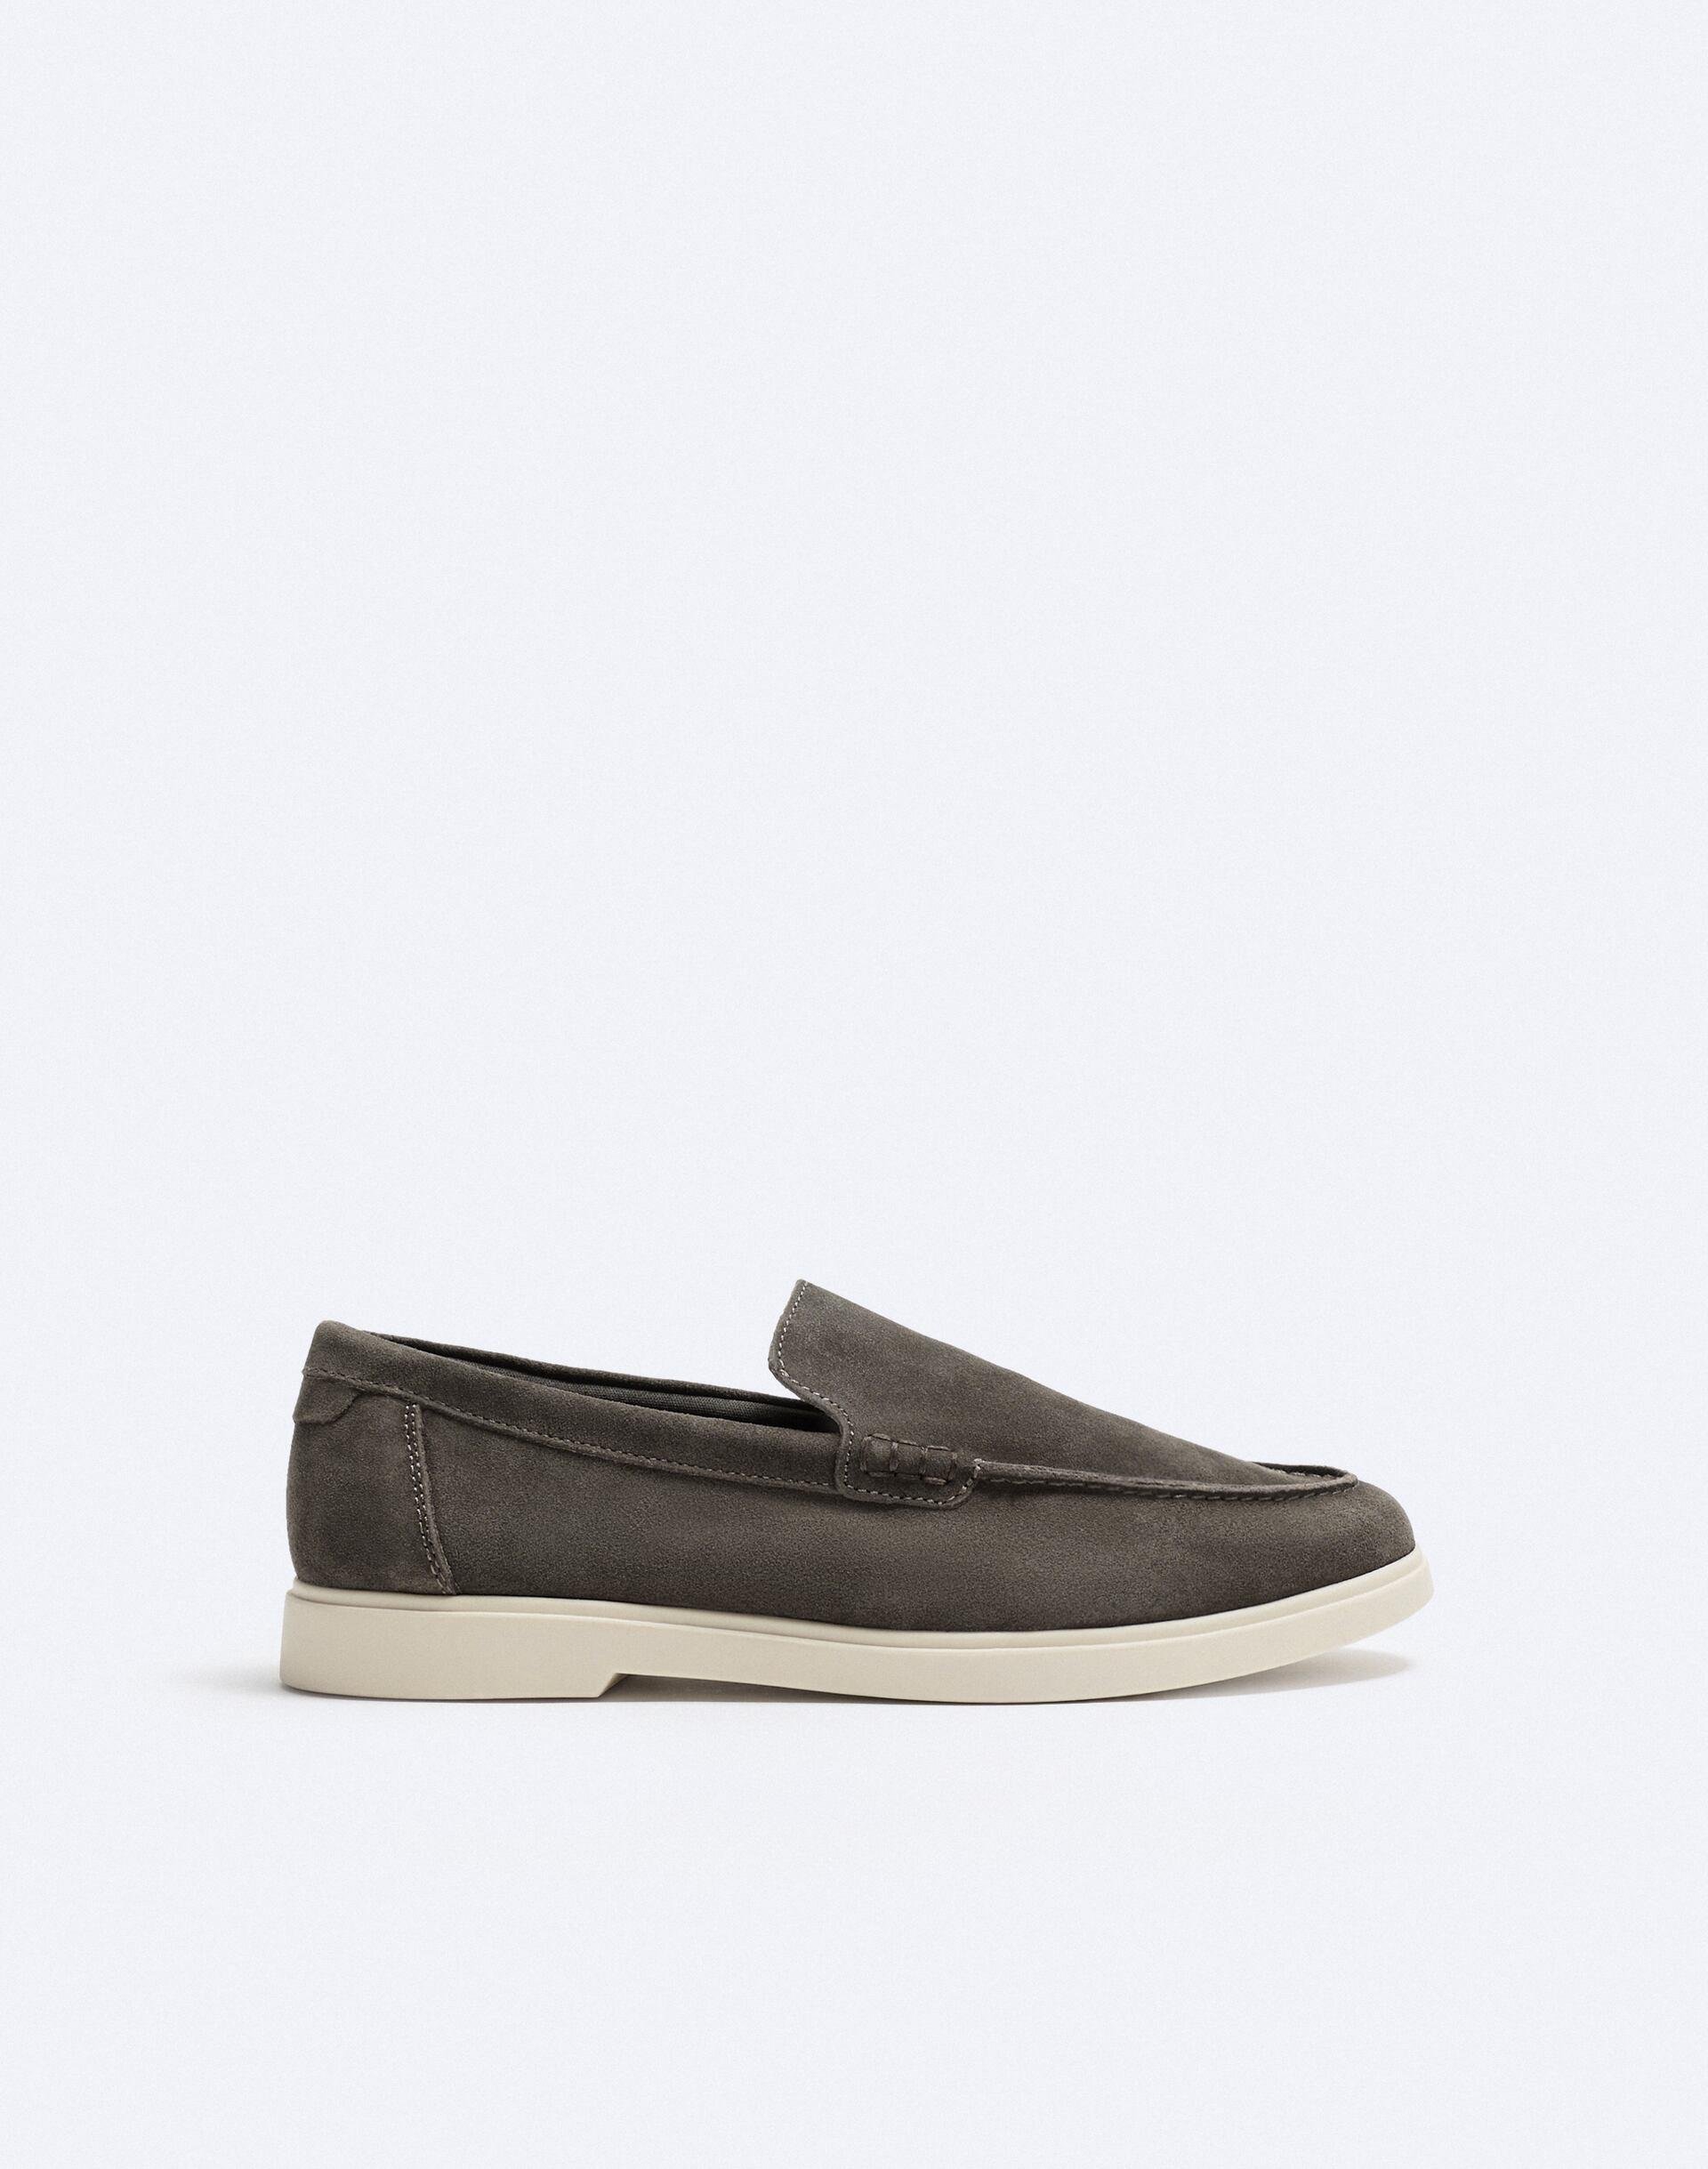 CASUAL SUEDE LOAFERS by ZARA